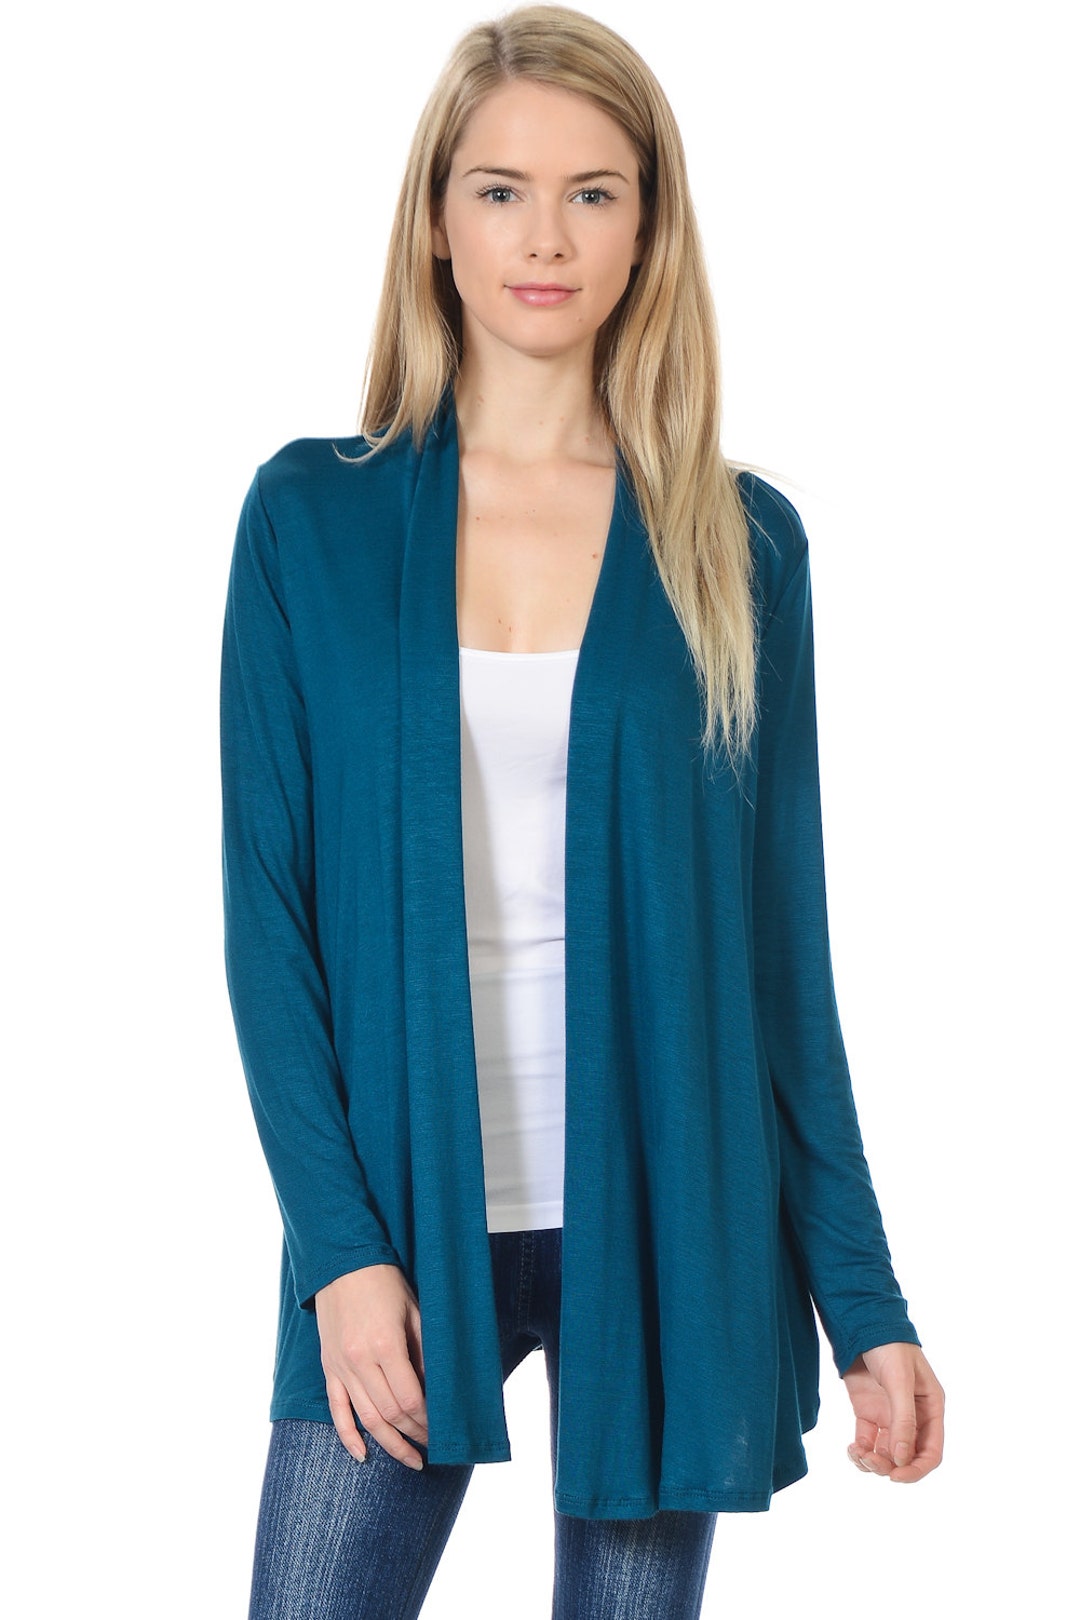 Solid Rayon Spandex Long Sleeve Jersey Cardigan Sweater Teal - Etsy